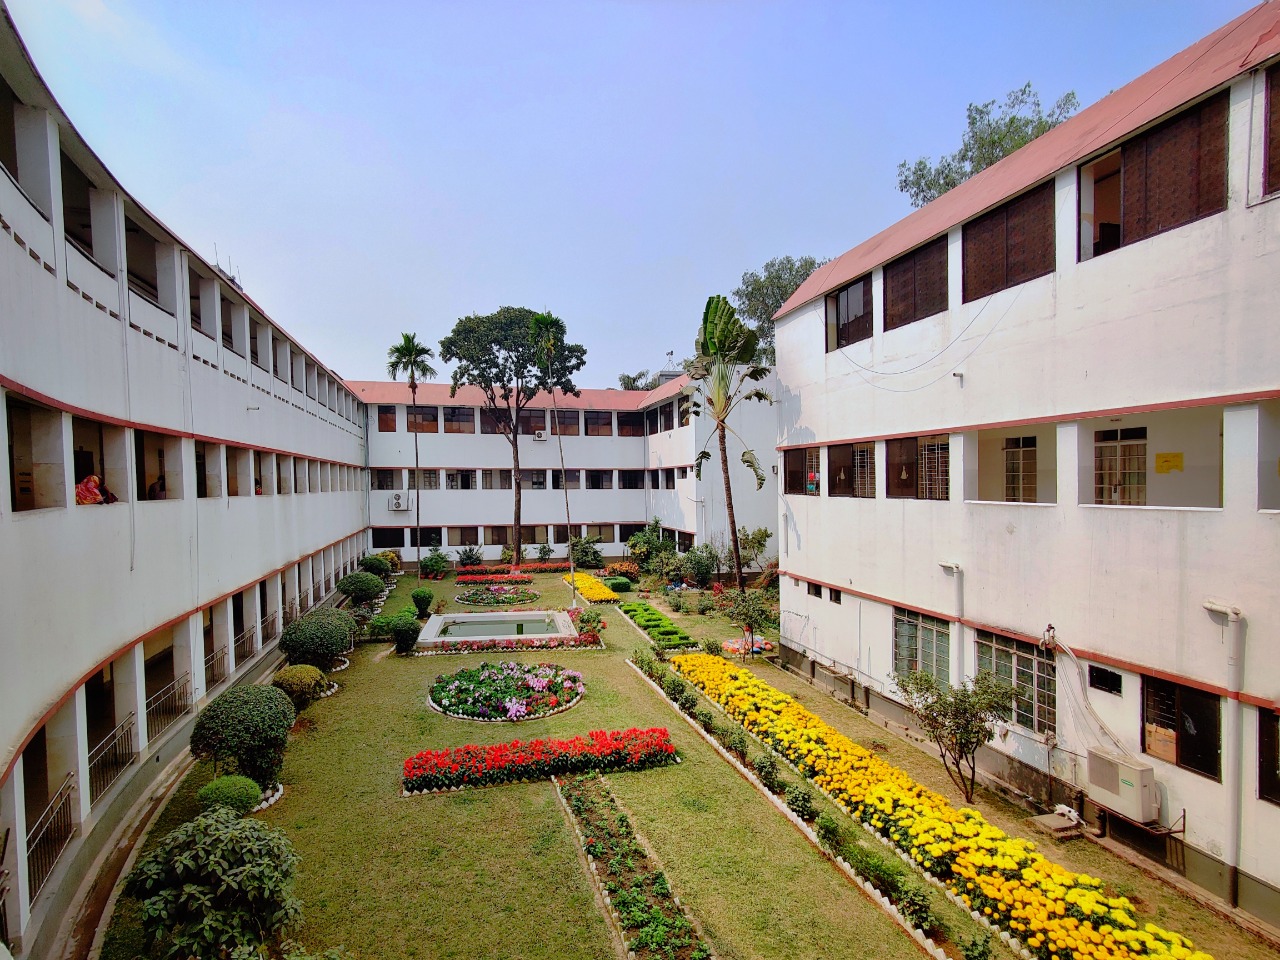 Holy Family Red Crescent Medical College